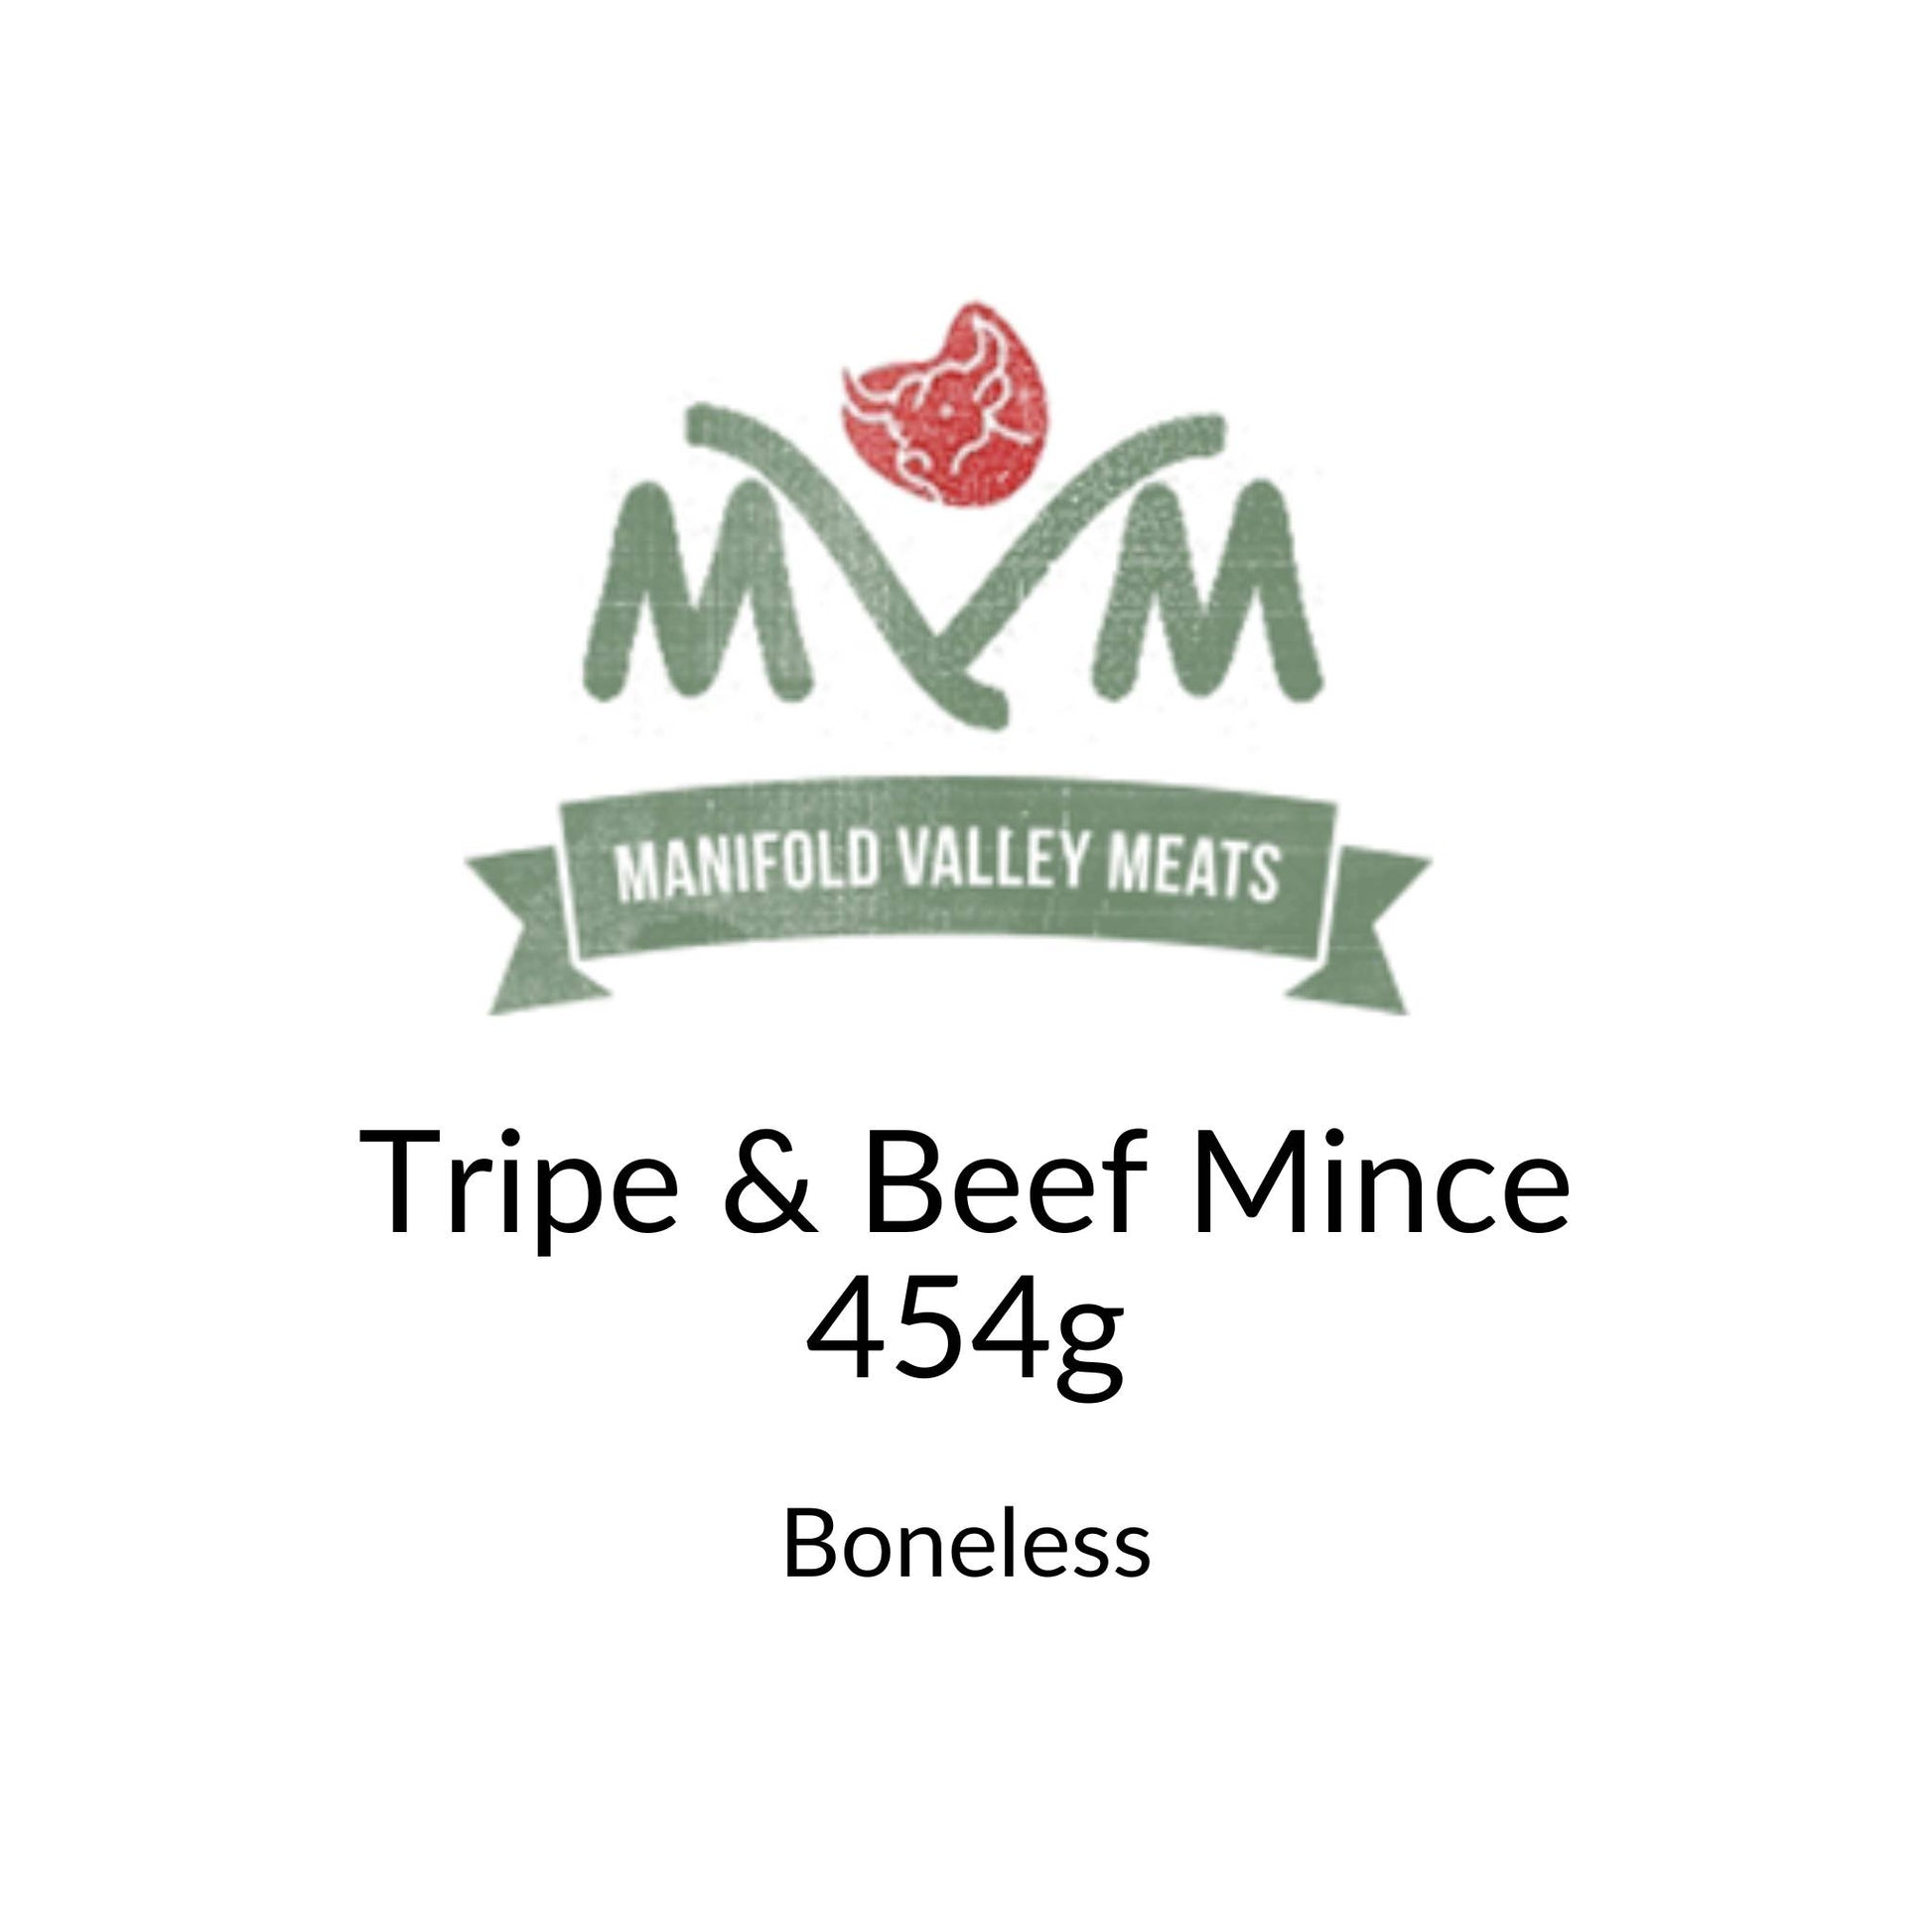 Manifold Valley Meats Tripe & Beef Mince Raw Dog Food